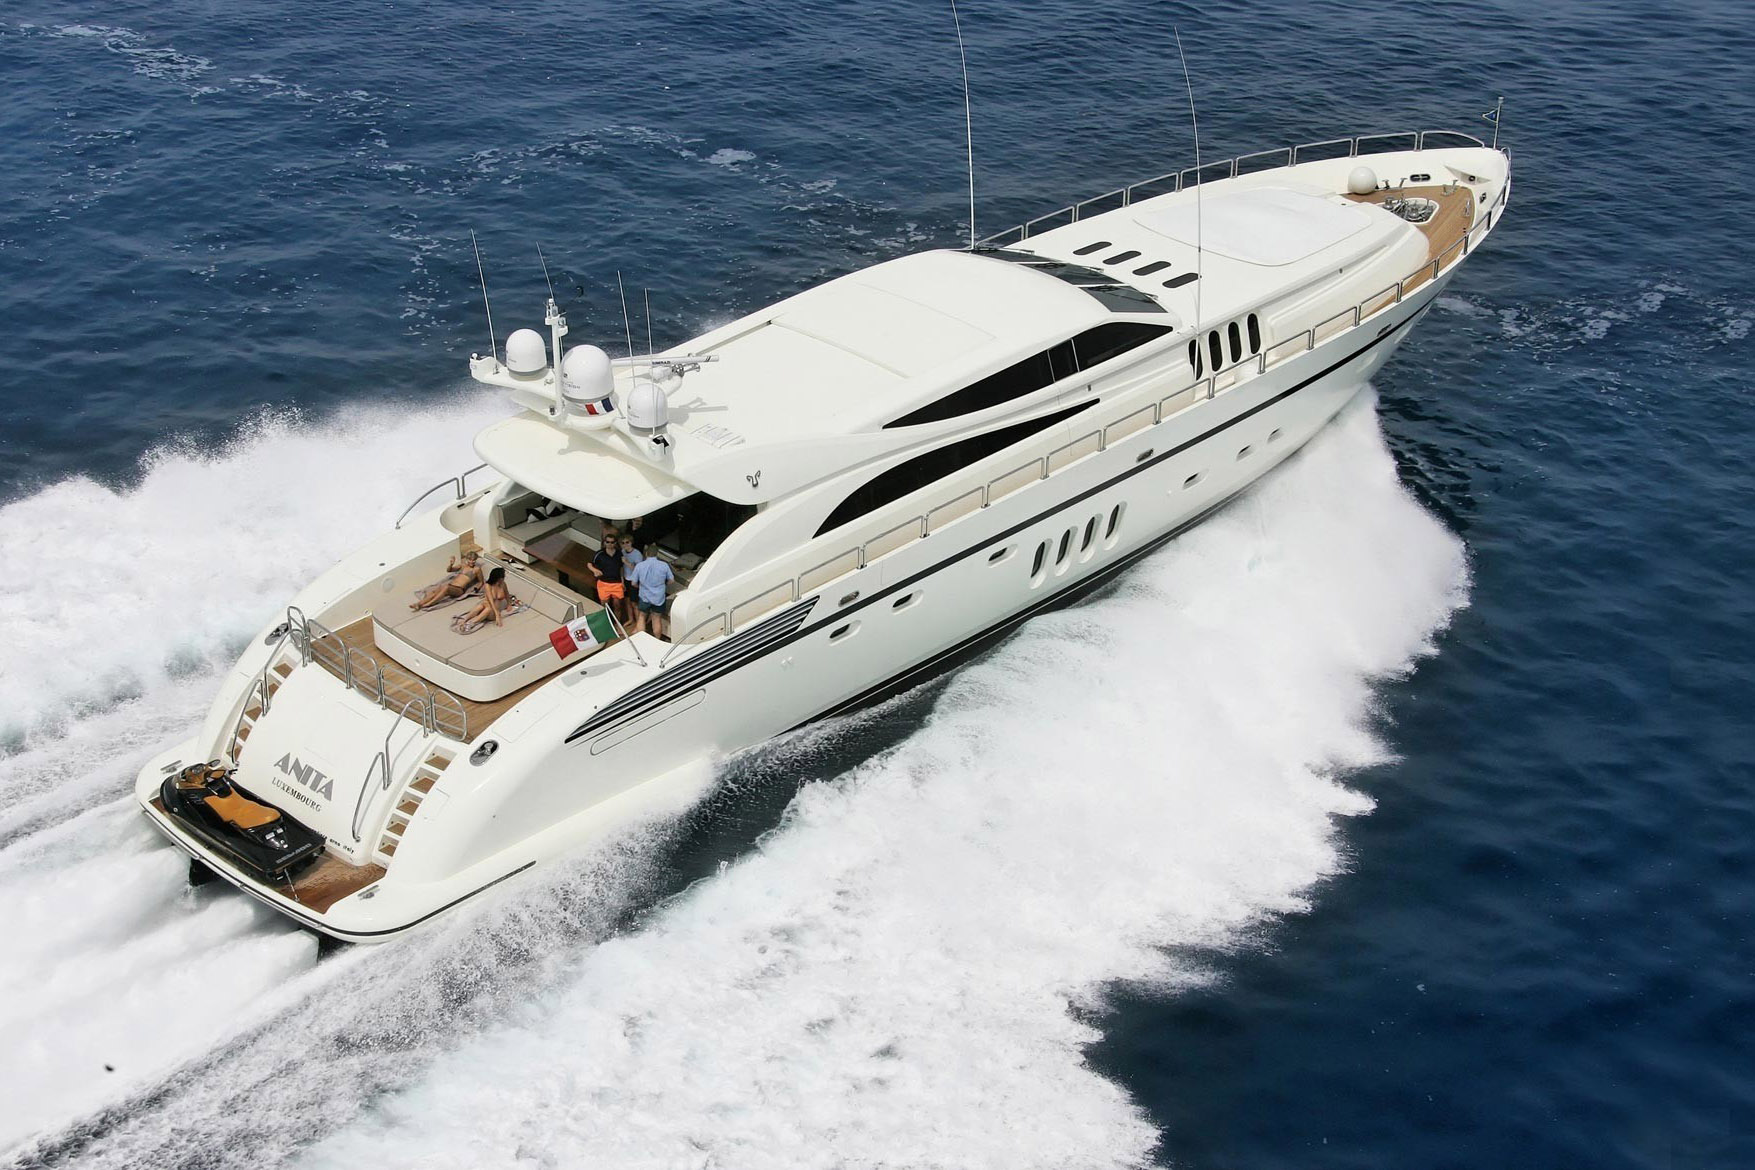 leopard yachts for sale